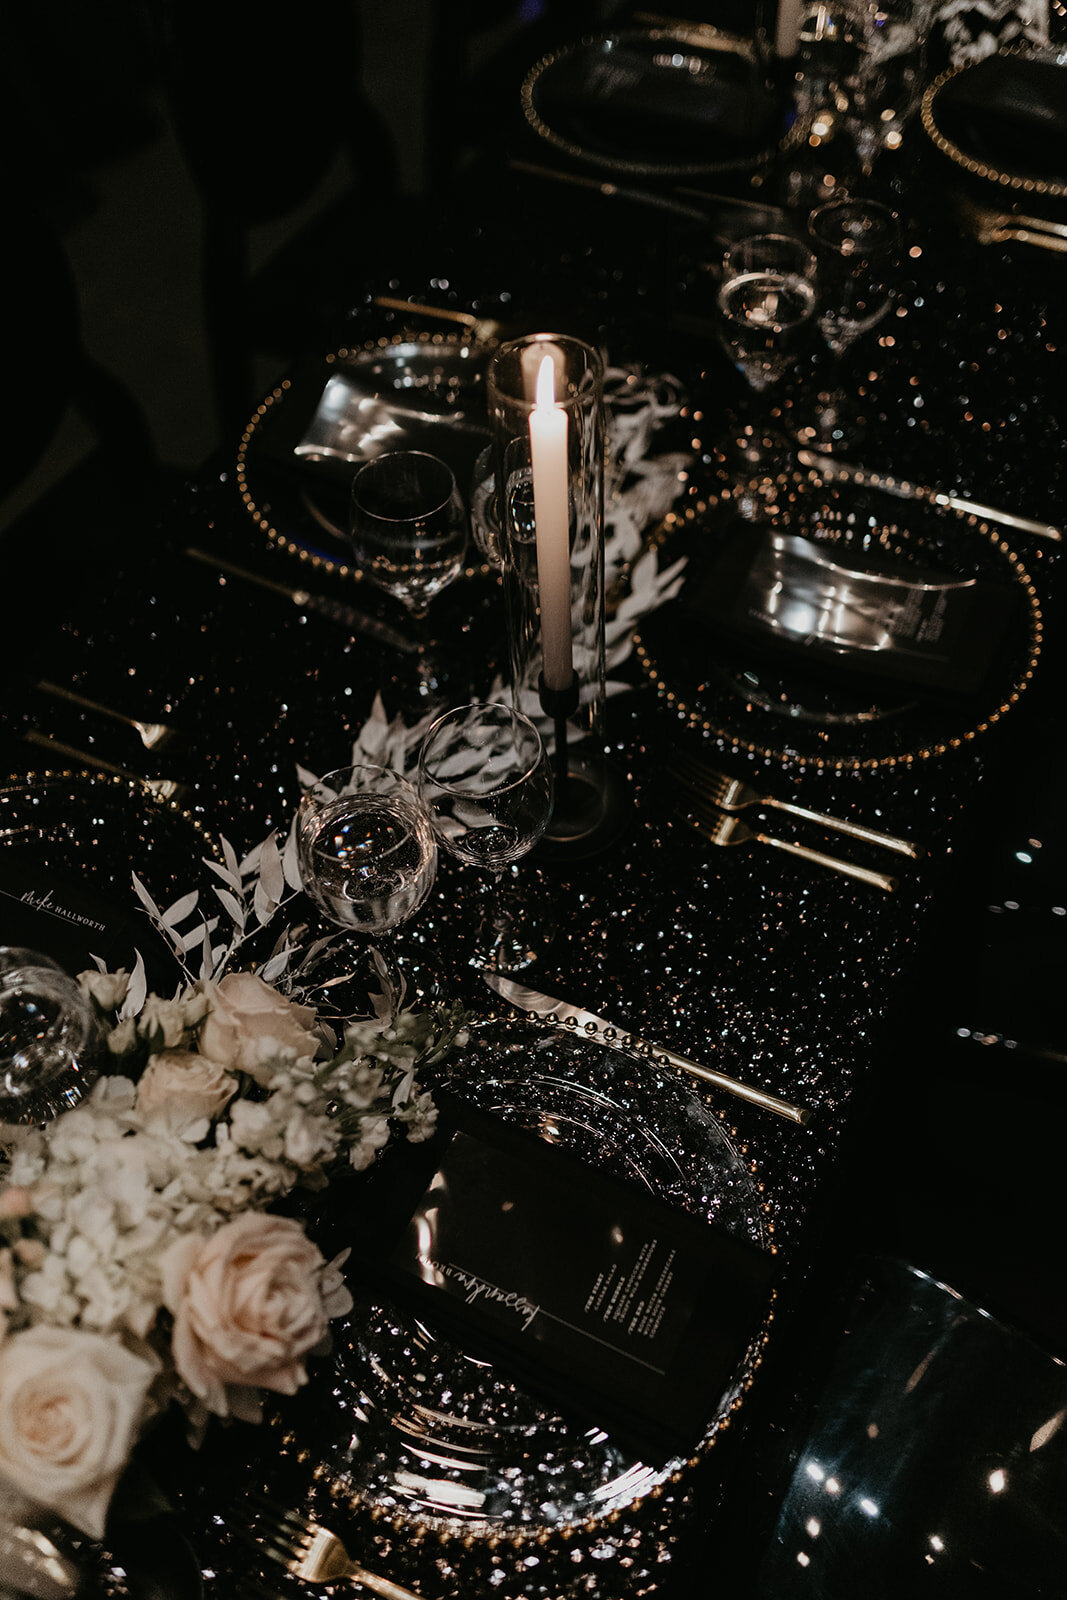 Table decor at the wedding reception features black, gold and white accents.